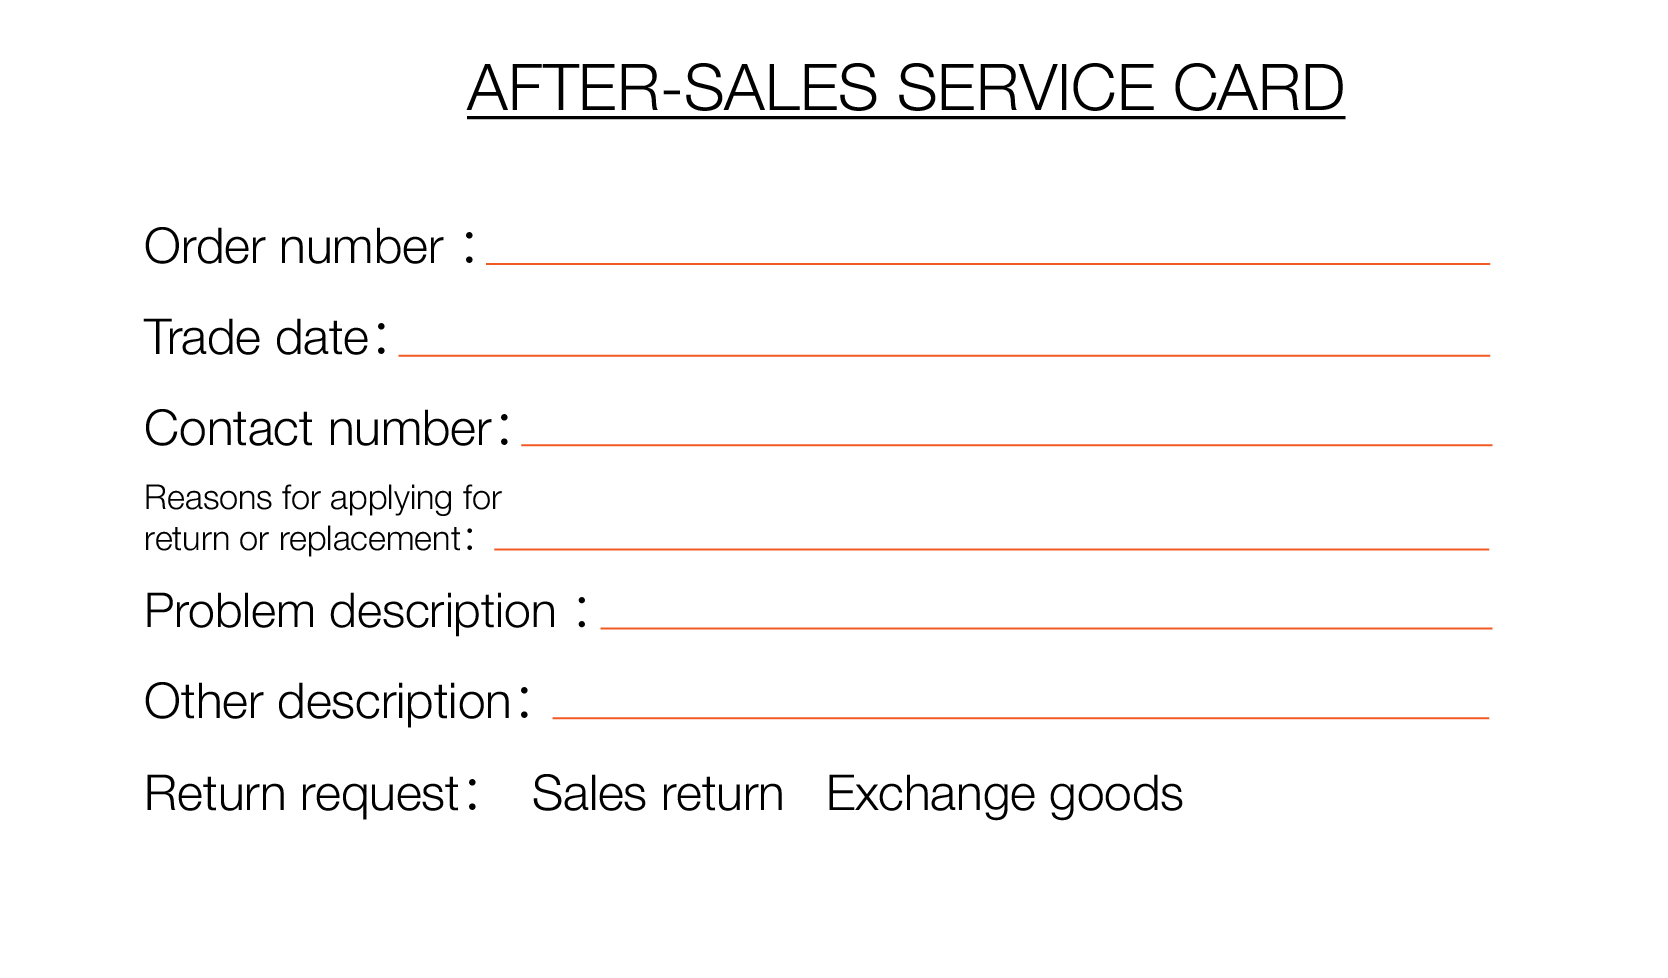 After-Sales service card